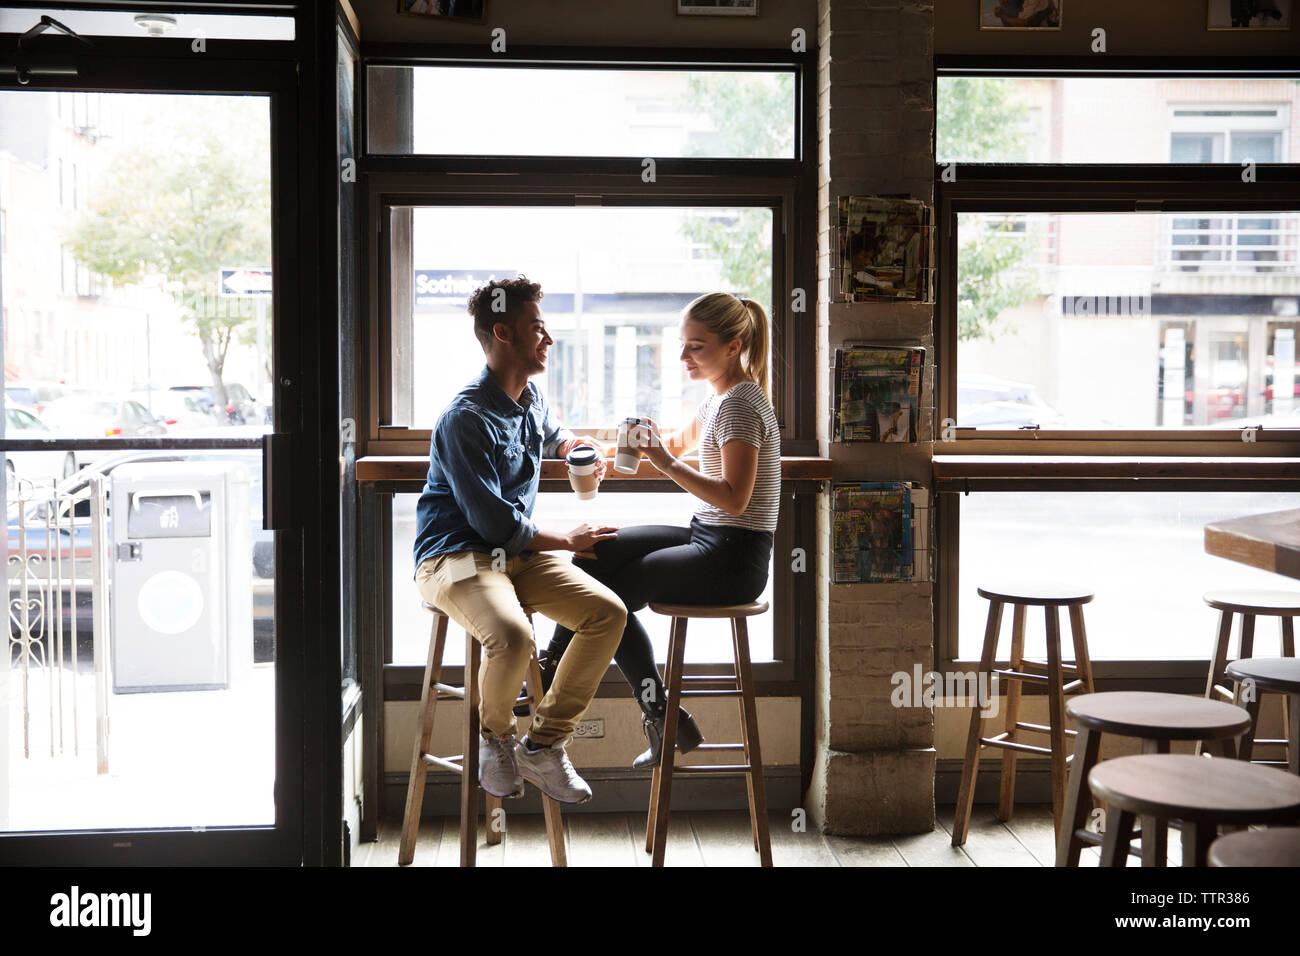 Smiling couple having coffee while talking by glass windows at cafe Stock Photo